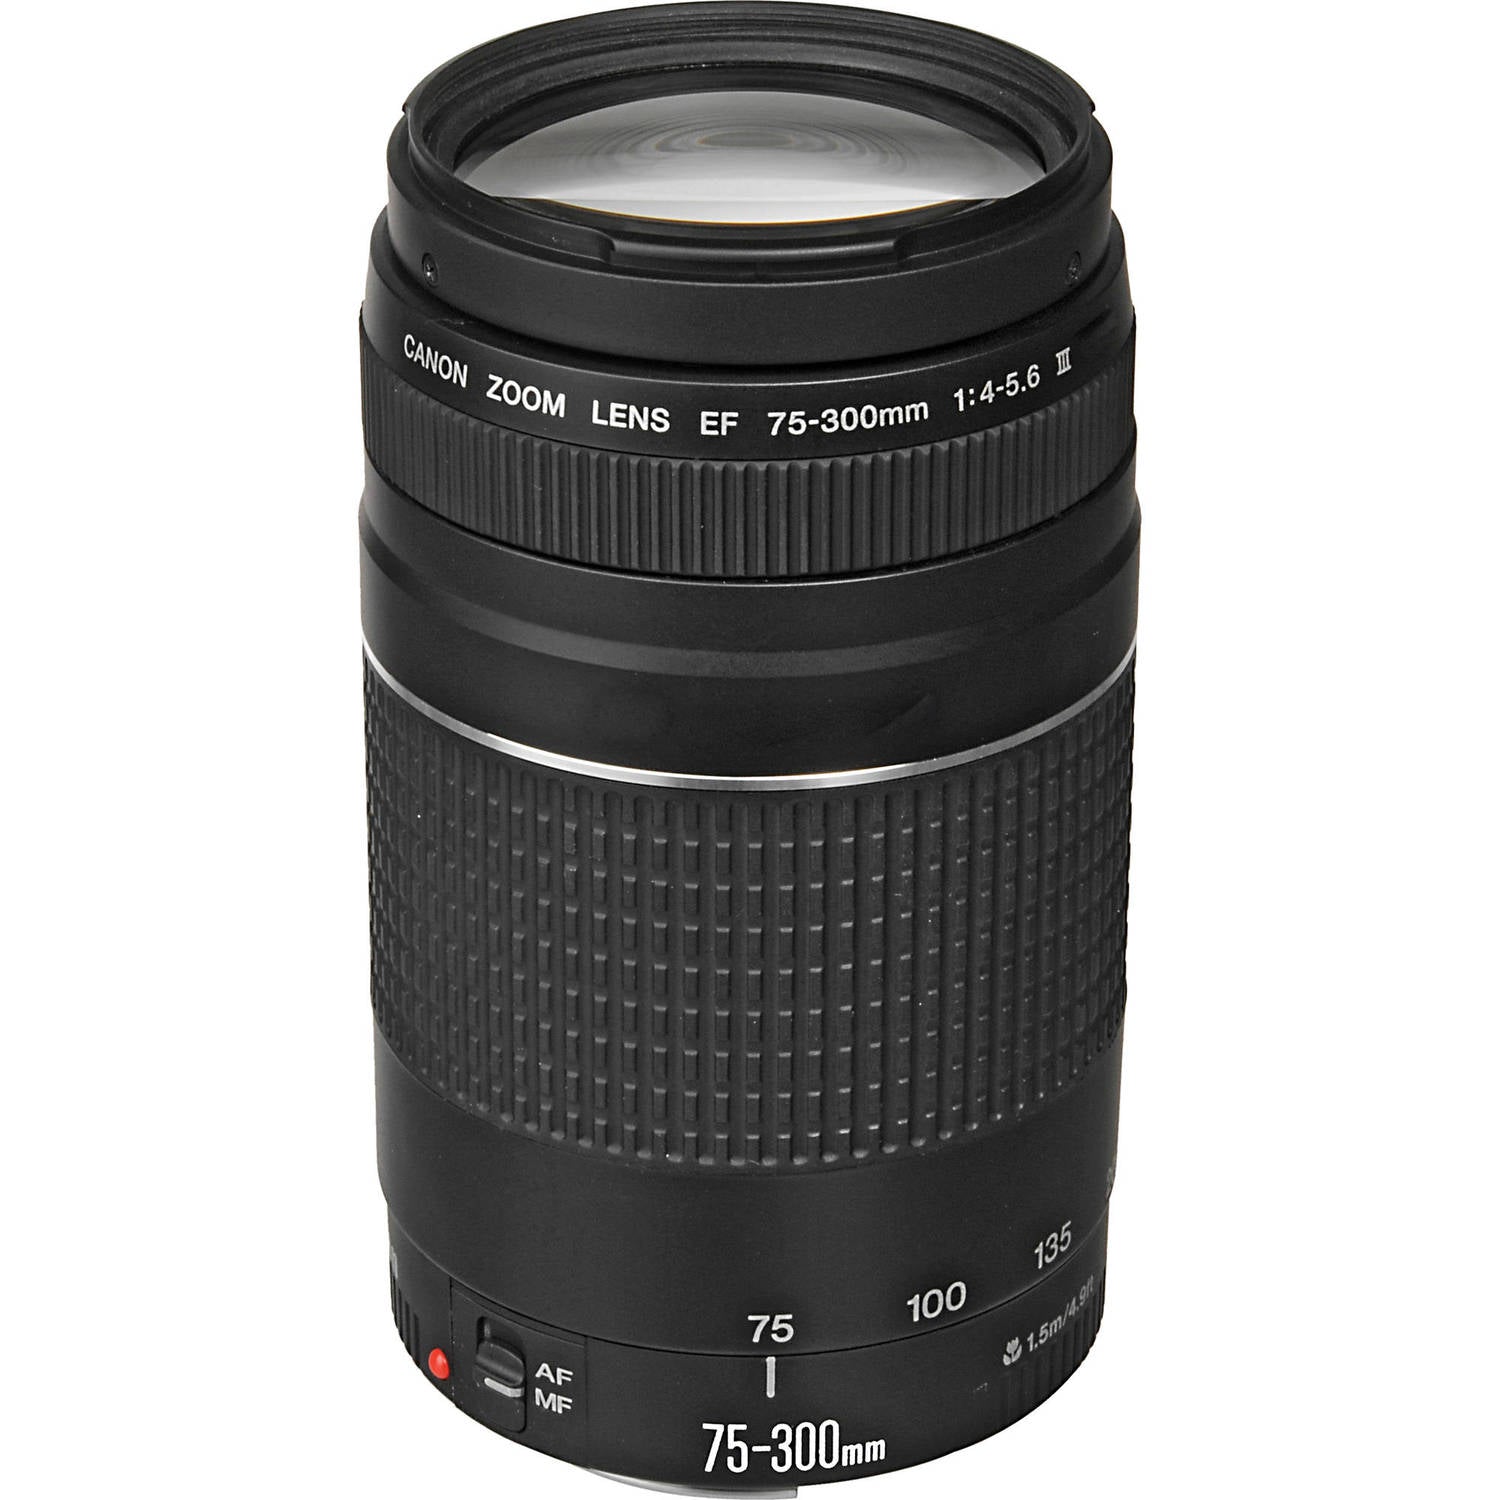 Canon EF 75-300mm f/4-5.6 III Lens (6473A003)  Includes: DSLR Sling Backpack, 3PC filter Kit,  + More